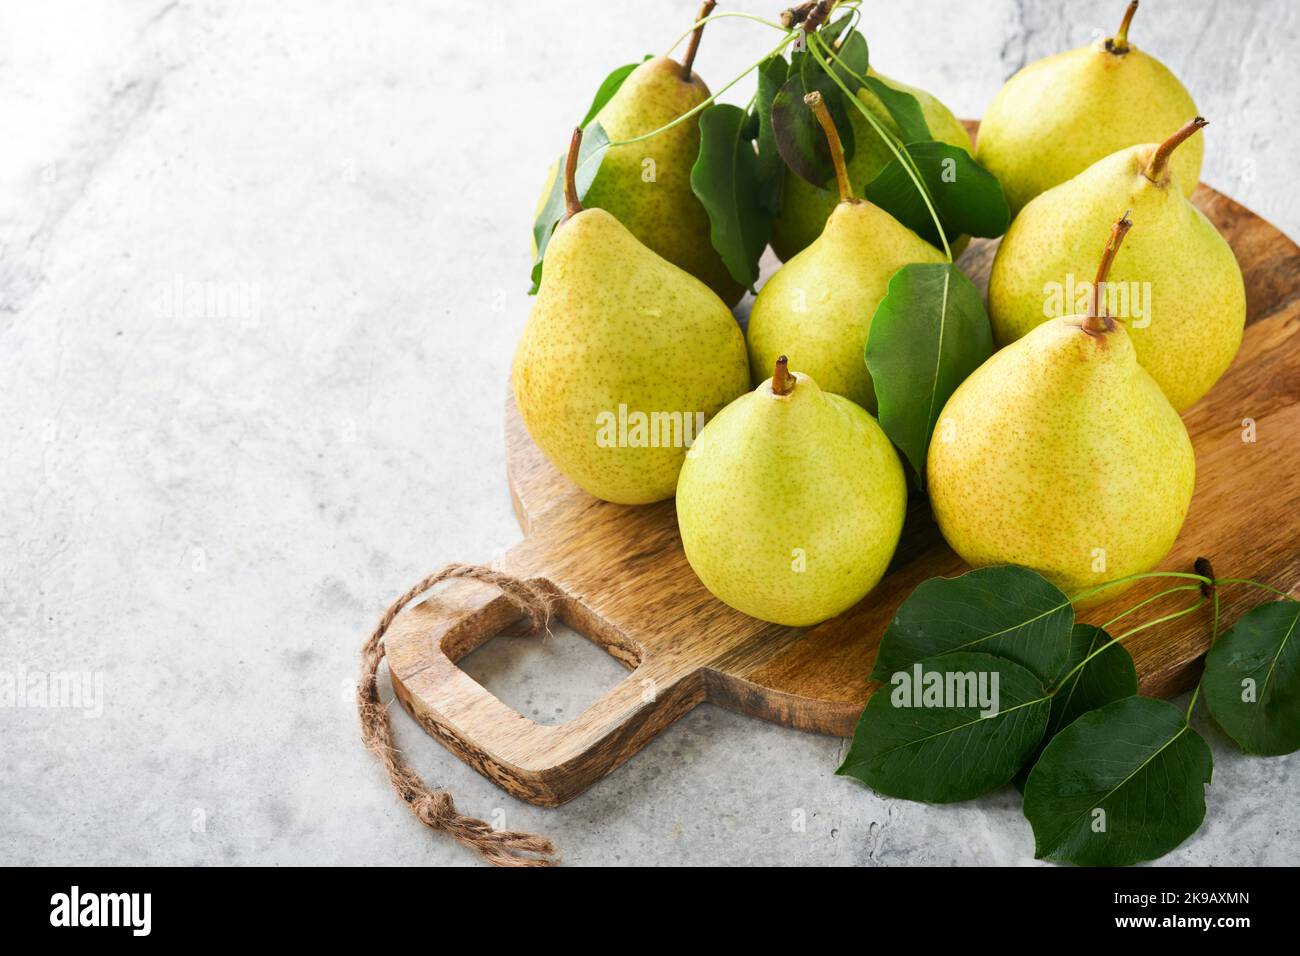 https://c8.alamy.com/comp/2K9AXMN/pears-fresh-sweet-organic-pears-with-leaves-on-stand-or-plate-on-old-stone-tile-background-frame-of-autumn-harvest-fruits-top-view-food-background-2K9AXMN.jpg